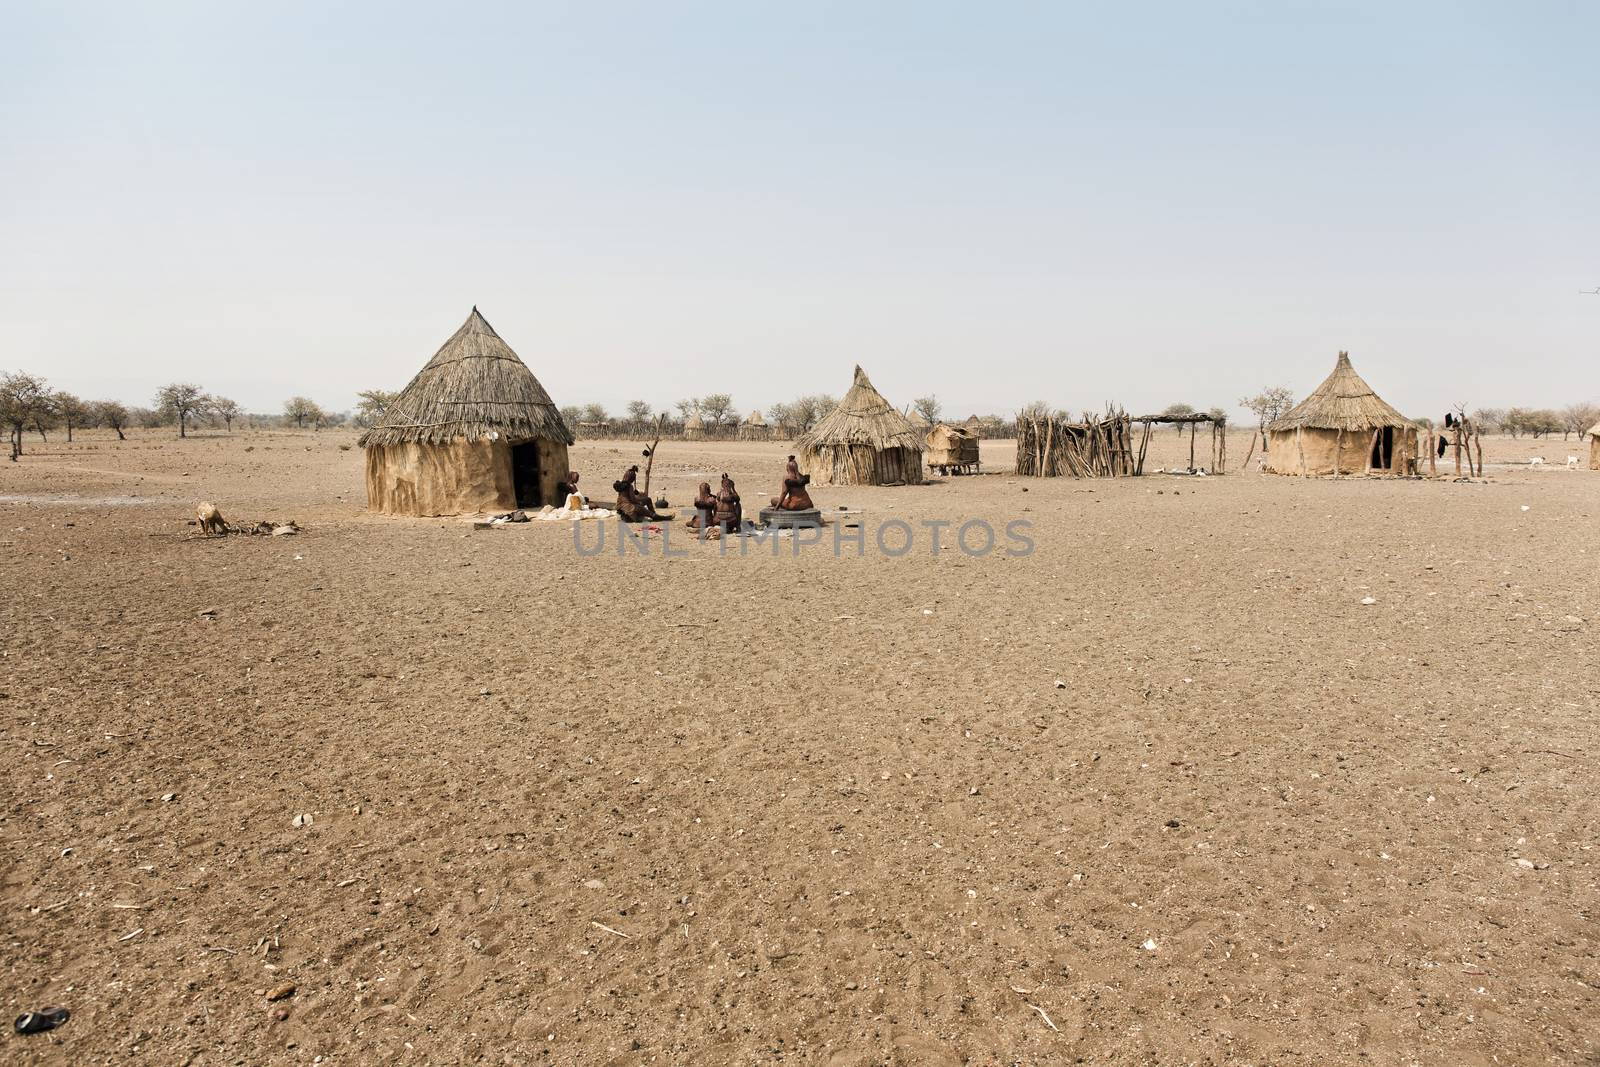 Himba village with traditional huts near Etosha National Park in by Tjeerdkruse